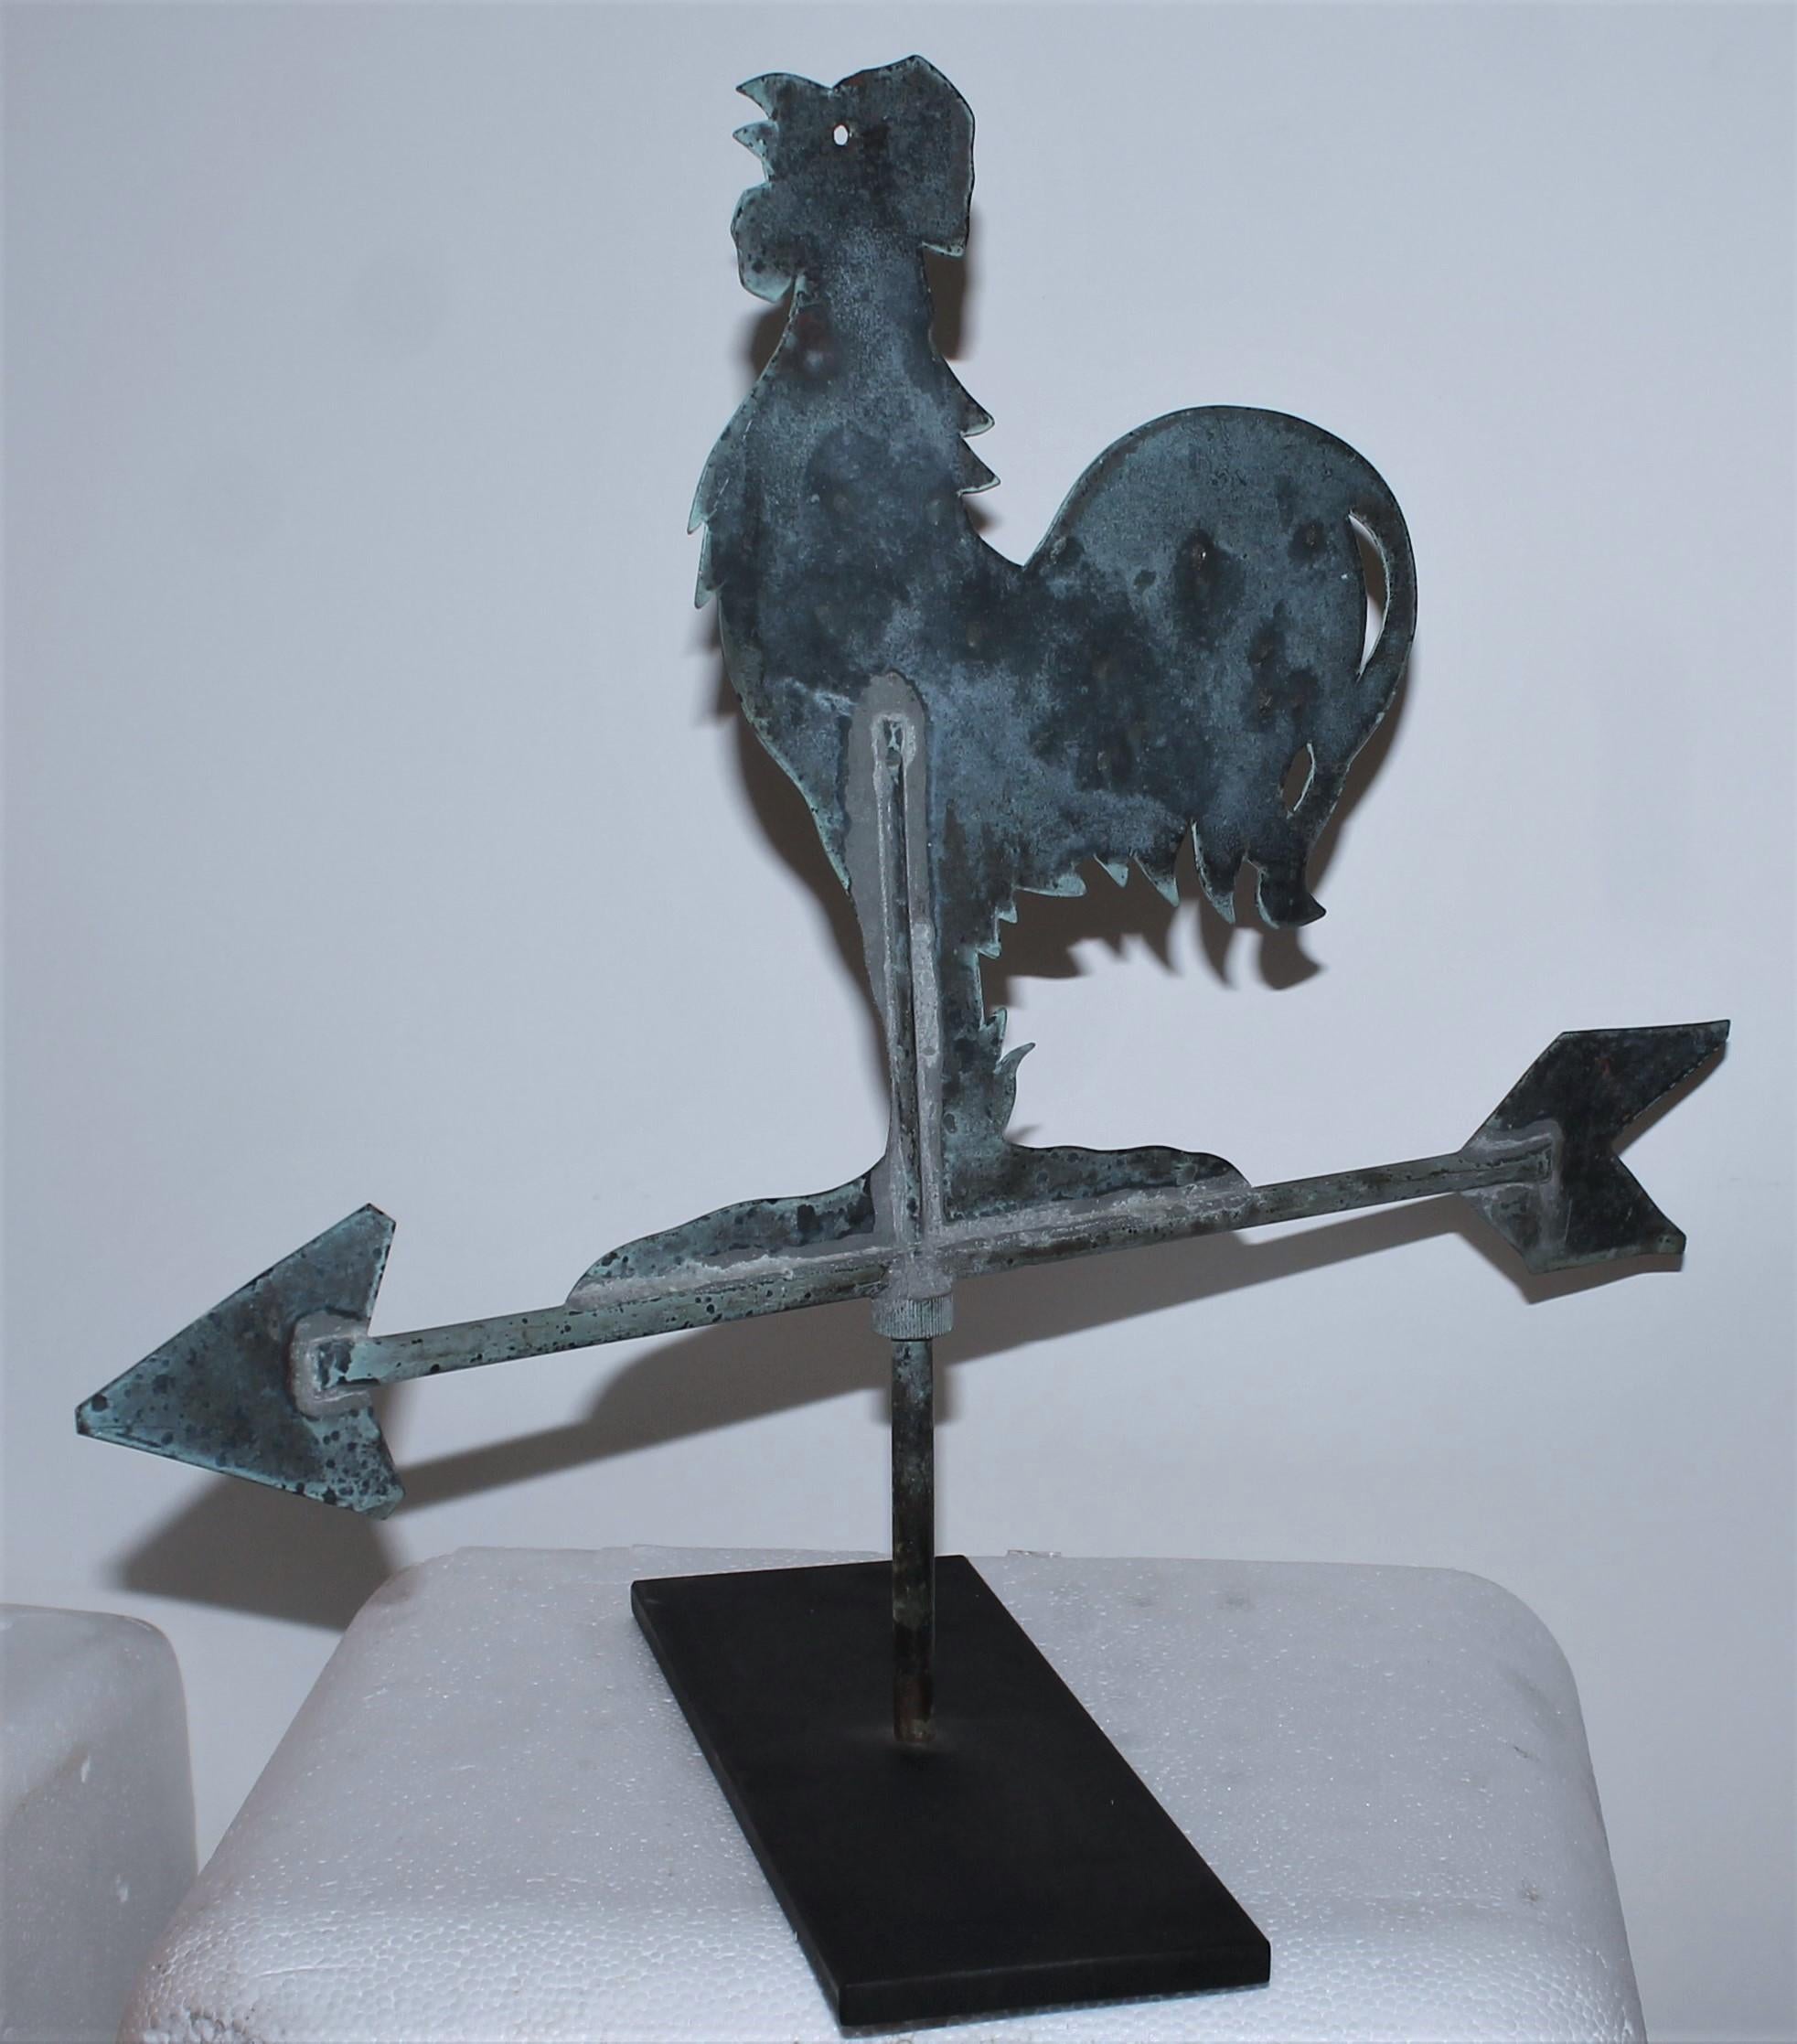 This fine patinaed copper diminutive rooster weather vane is in fine as found condition. It does have old bullet marks and is on its own custom made iron stand. This fine cock has such great patina and could be used on a small barn or house as well.